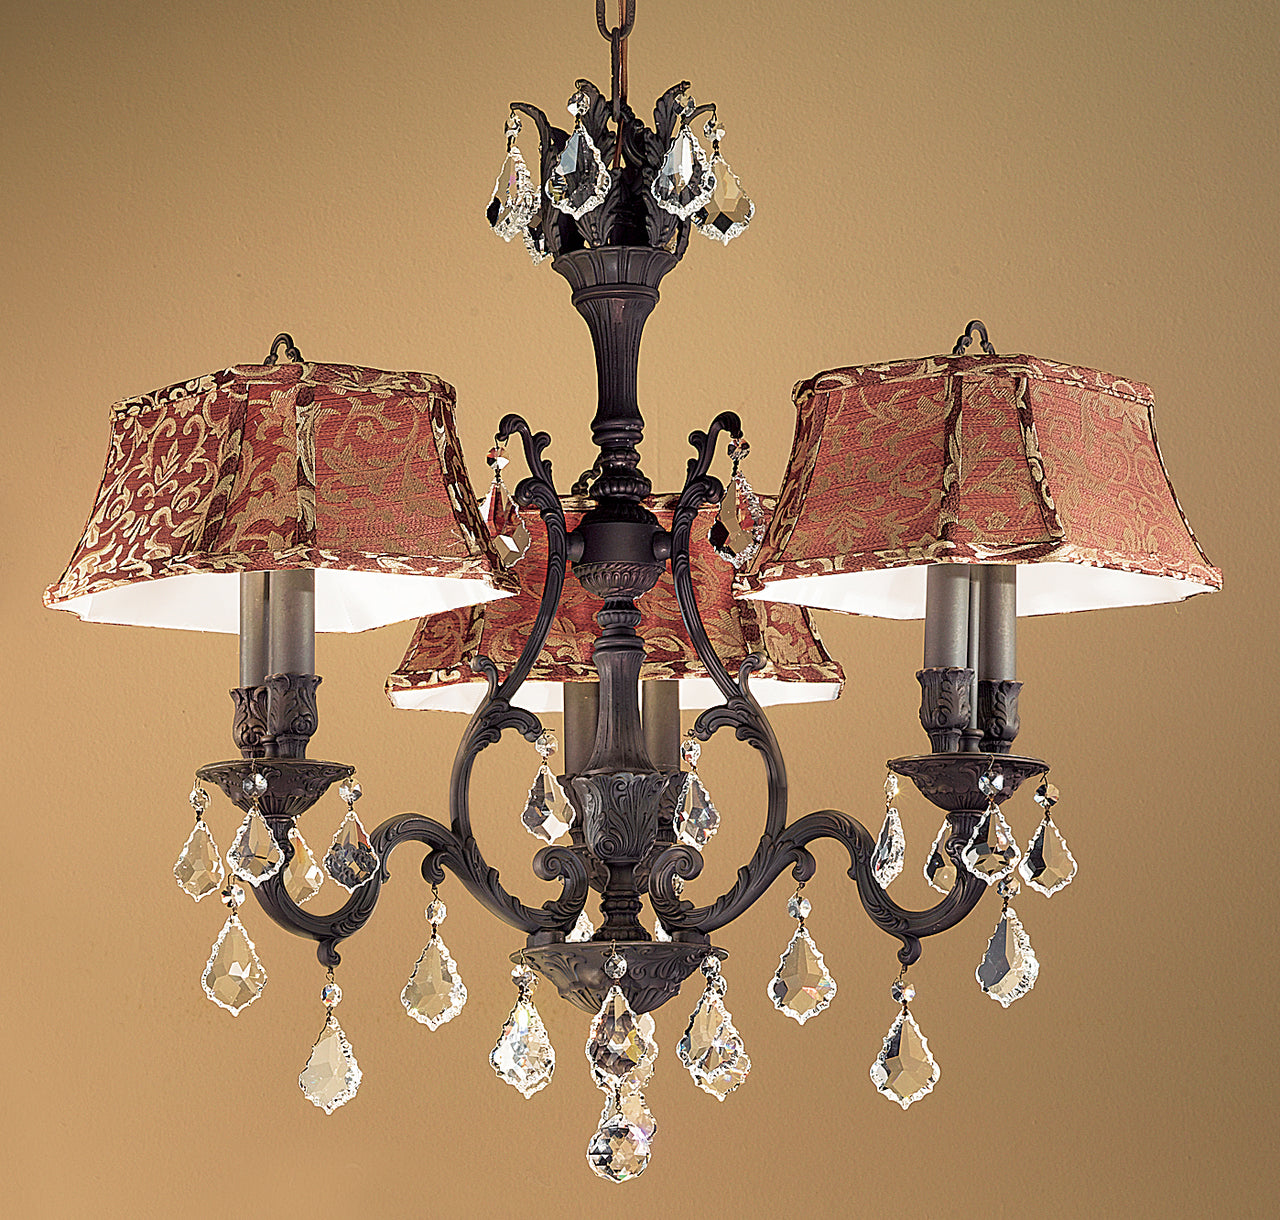 Classic Lighting 57363 FG CBK Majestic Crystal Chandelier in French Gold (Imported from Spain)